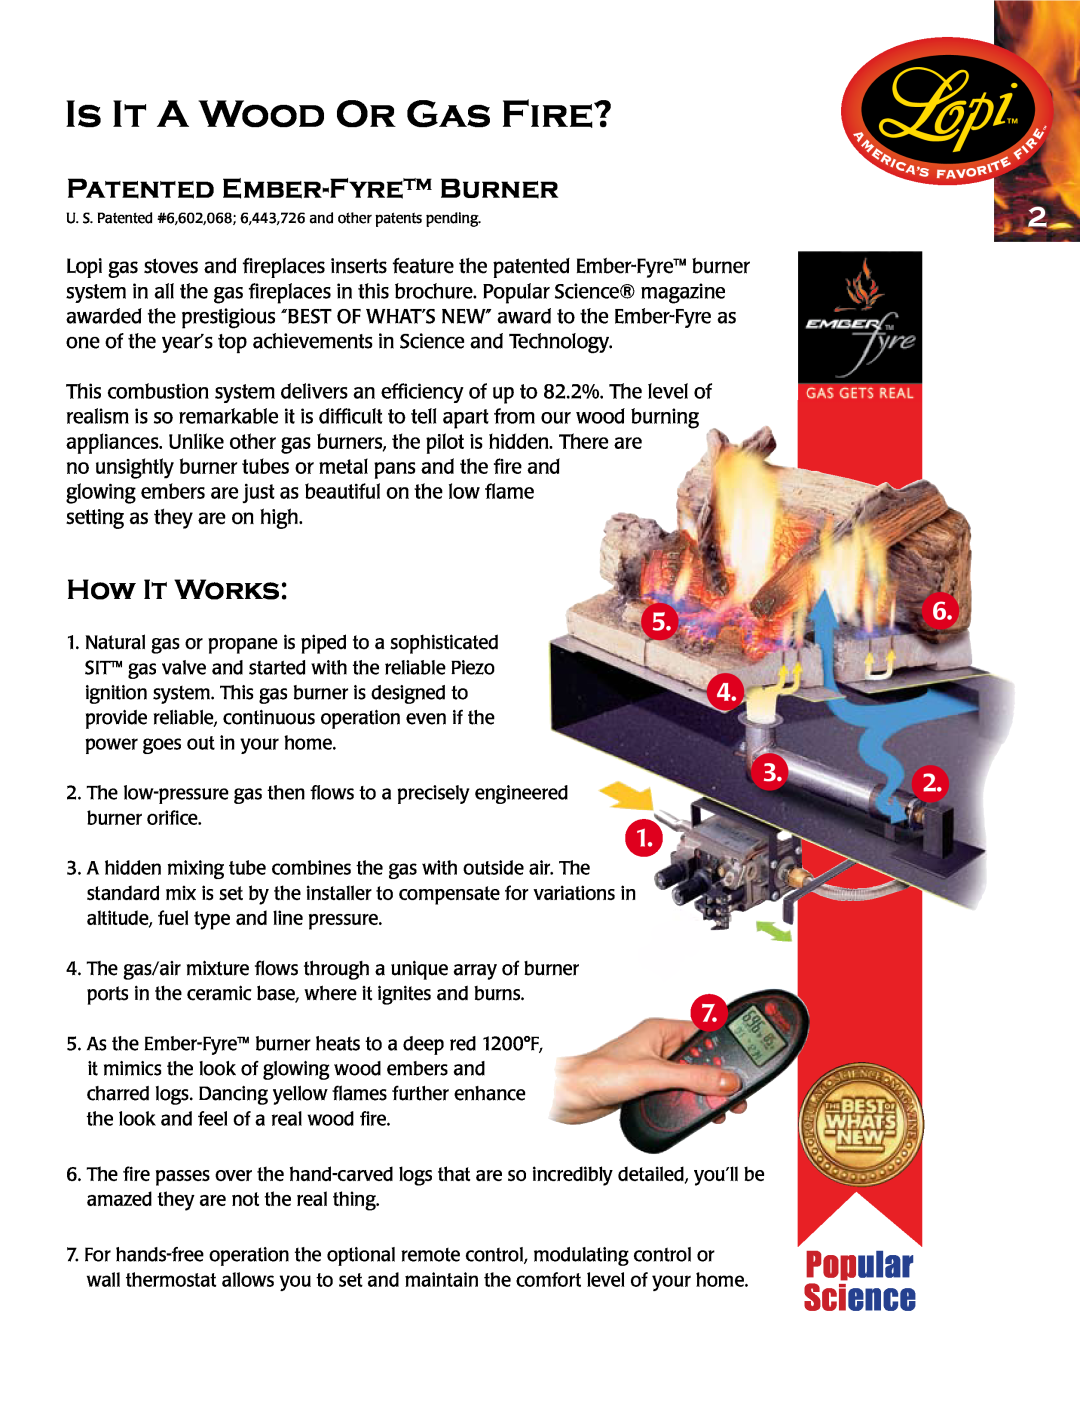 Lopi Gas Stove And Fireplace Is It A Wood Or Gas Fire?, Patented Ember-Fyreburner, How It Works, 6 4 3, Popular Science 